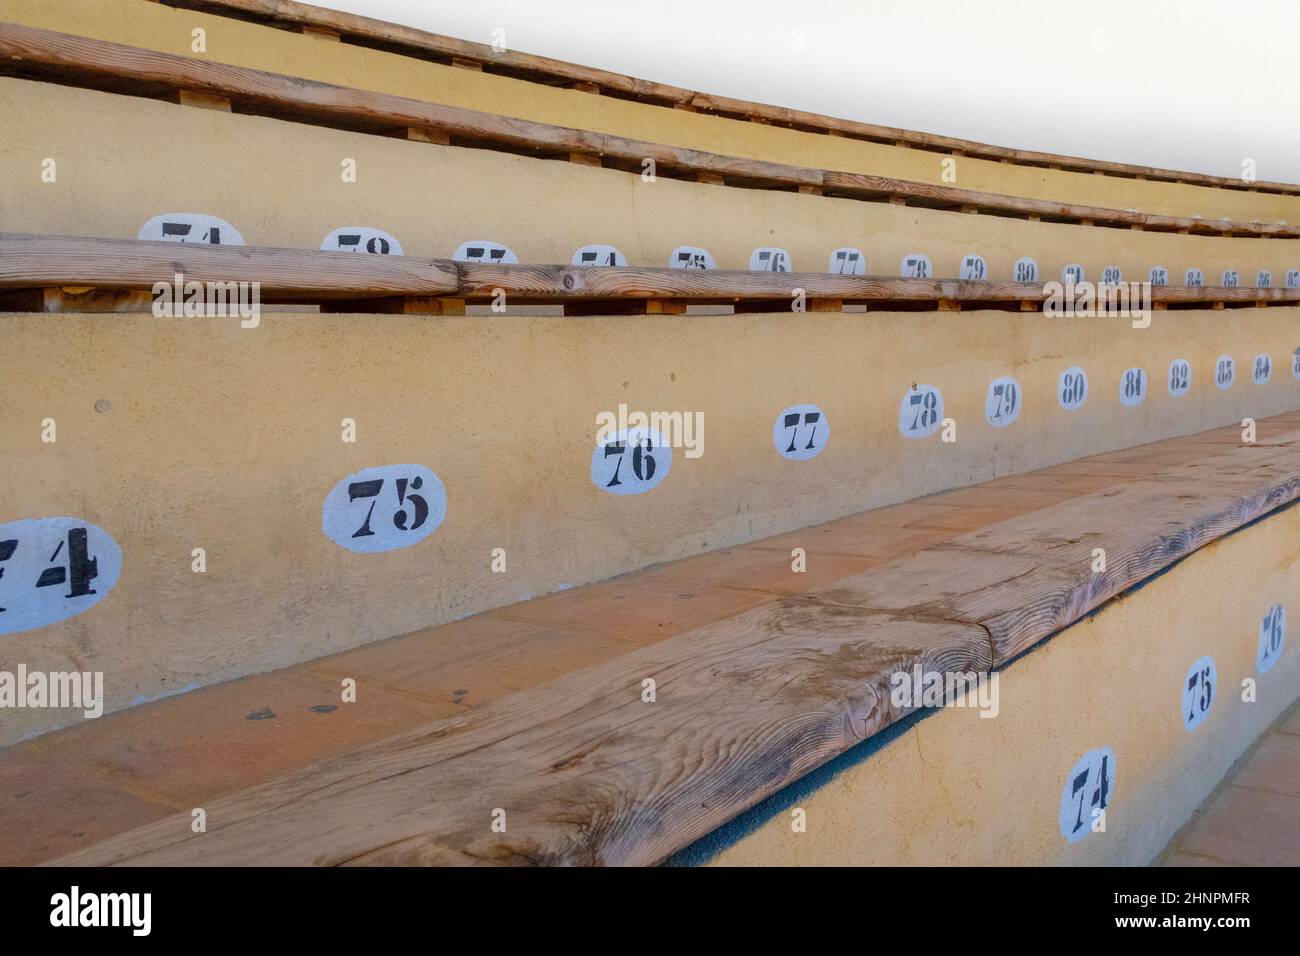 Seat numbers for the spectator of the Bullring fight in Ronda.  The bullring at Ronda is the oldest bullfighting ring in Ronda Stock Photo